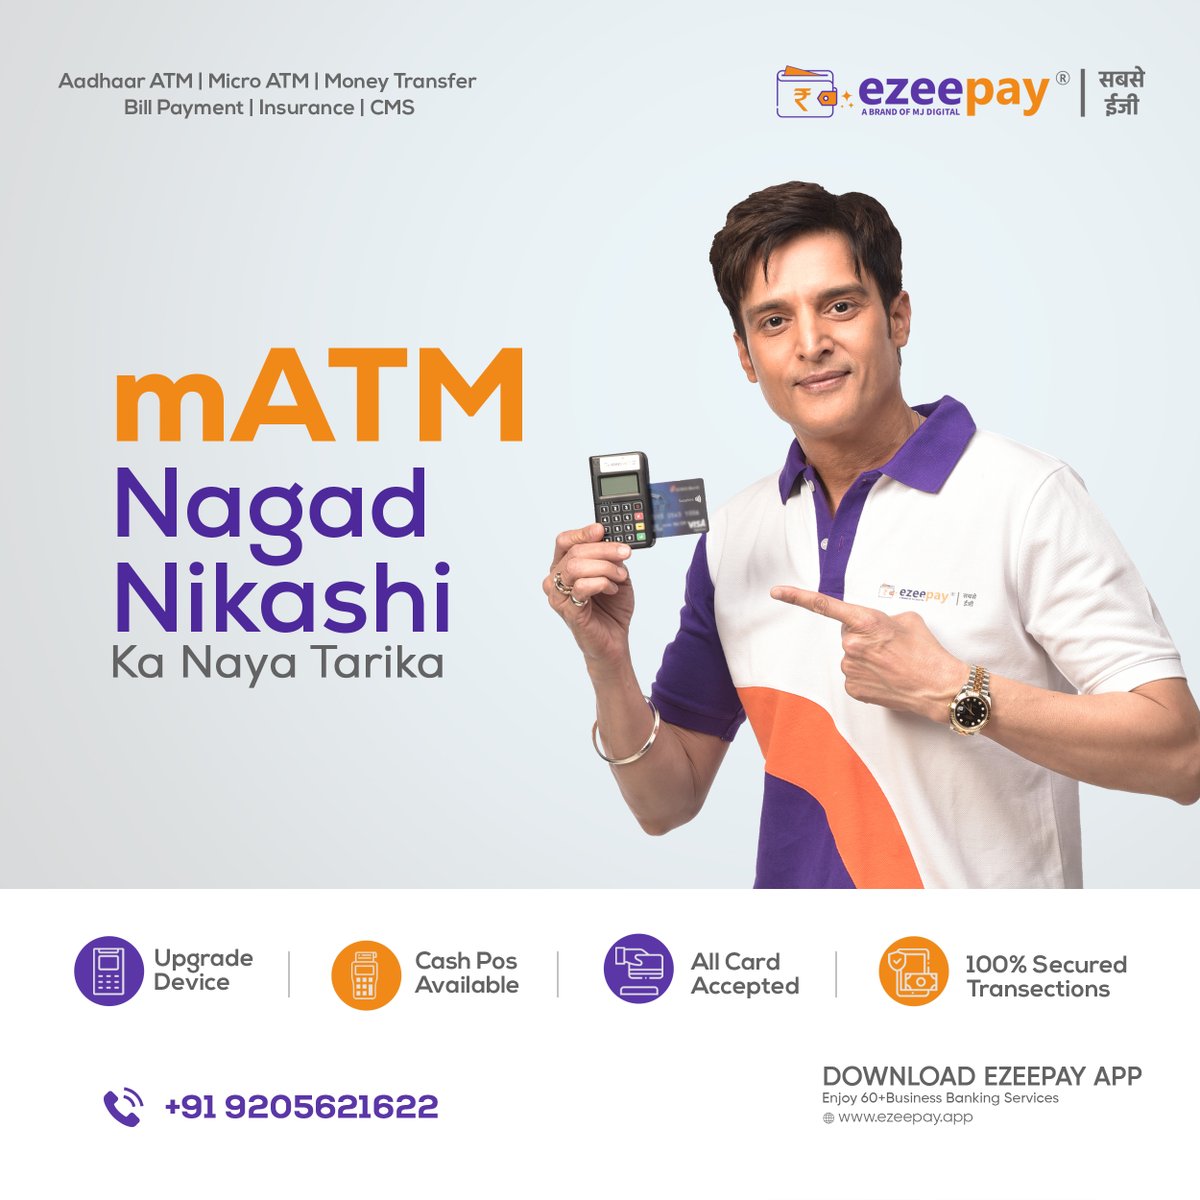 '𝗺𝗔𝗧𝗠 
𝗡𝗮𝗴𝗮𝗱 𝗡𝗶𝗸𝗮𝘀𝗵𝗶 𝗸𝗮 𝗡𝗮𝘆𝗮 𝗧𝗮𝗿𝗶𝗸𝗮'   

Get your MATM for Debit and credit card payments
 #ezeepay #microatm #bankingservices #service #NPCI #digital #digitalindia #highercommission #extra #cashback #DigitalPayments #creditcarddebt #debitcardoffers